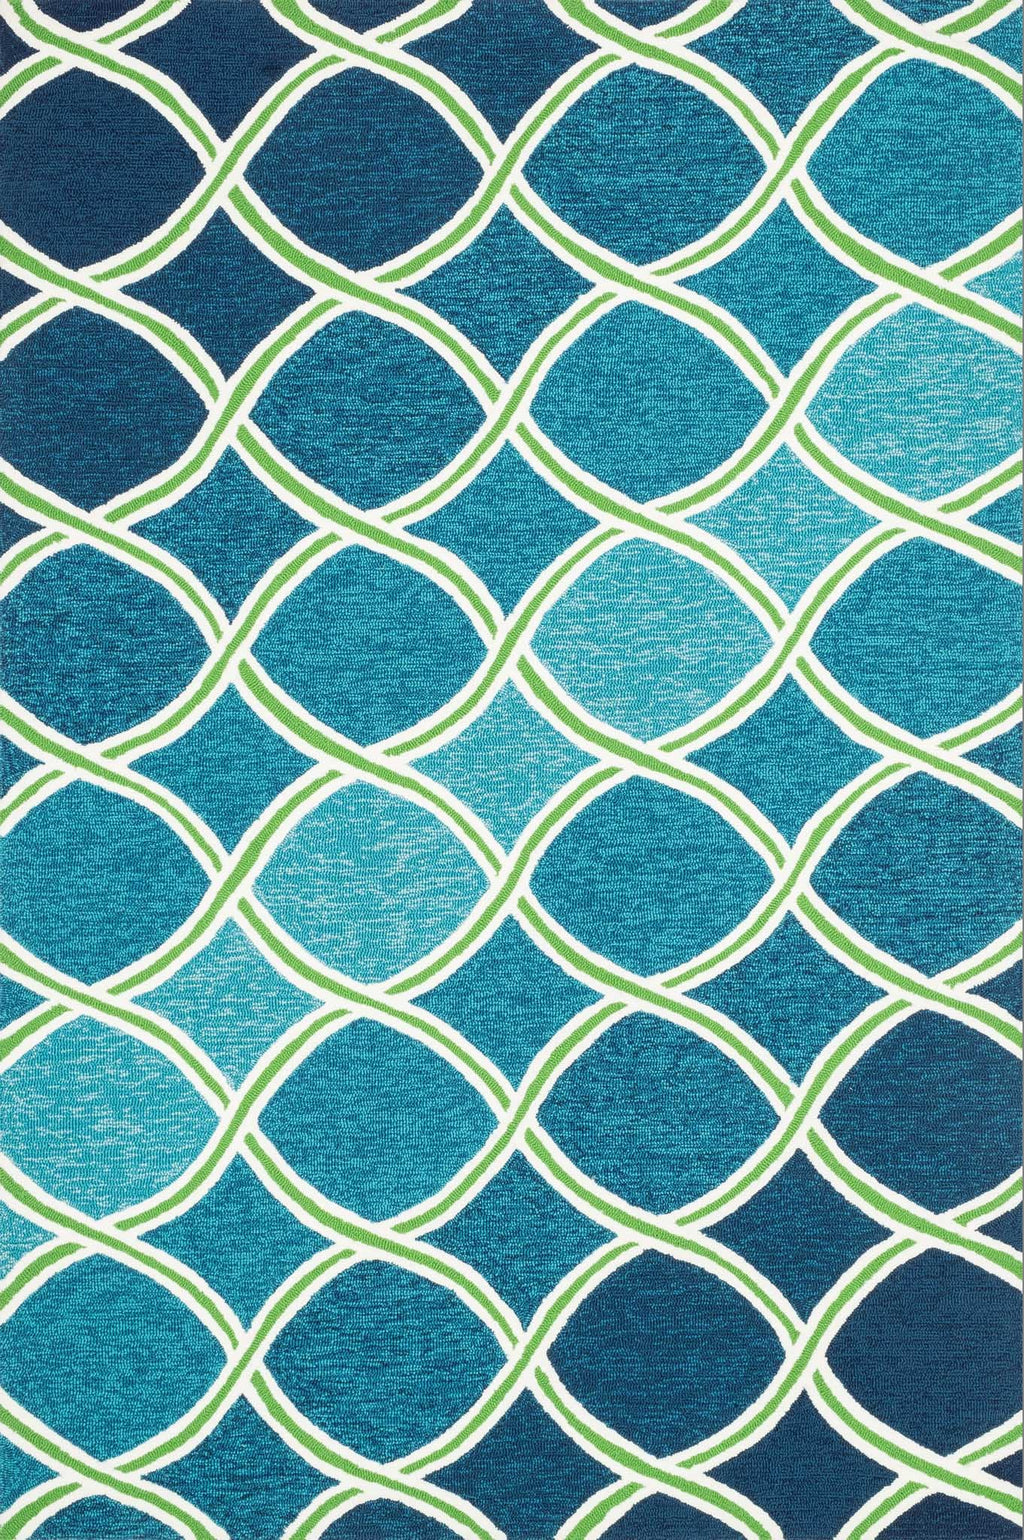 VENICE BEACH Collection Rug  in  BLUE / GREEN Blue Small Hand-Hooked Polypropylene